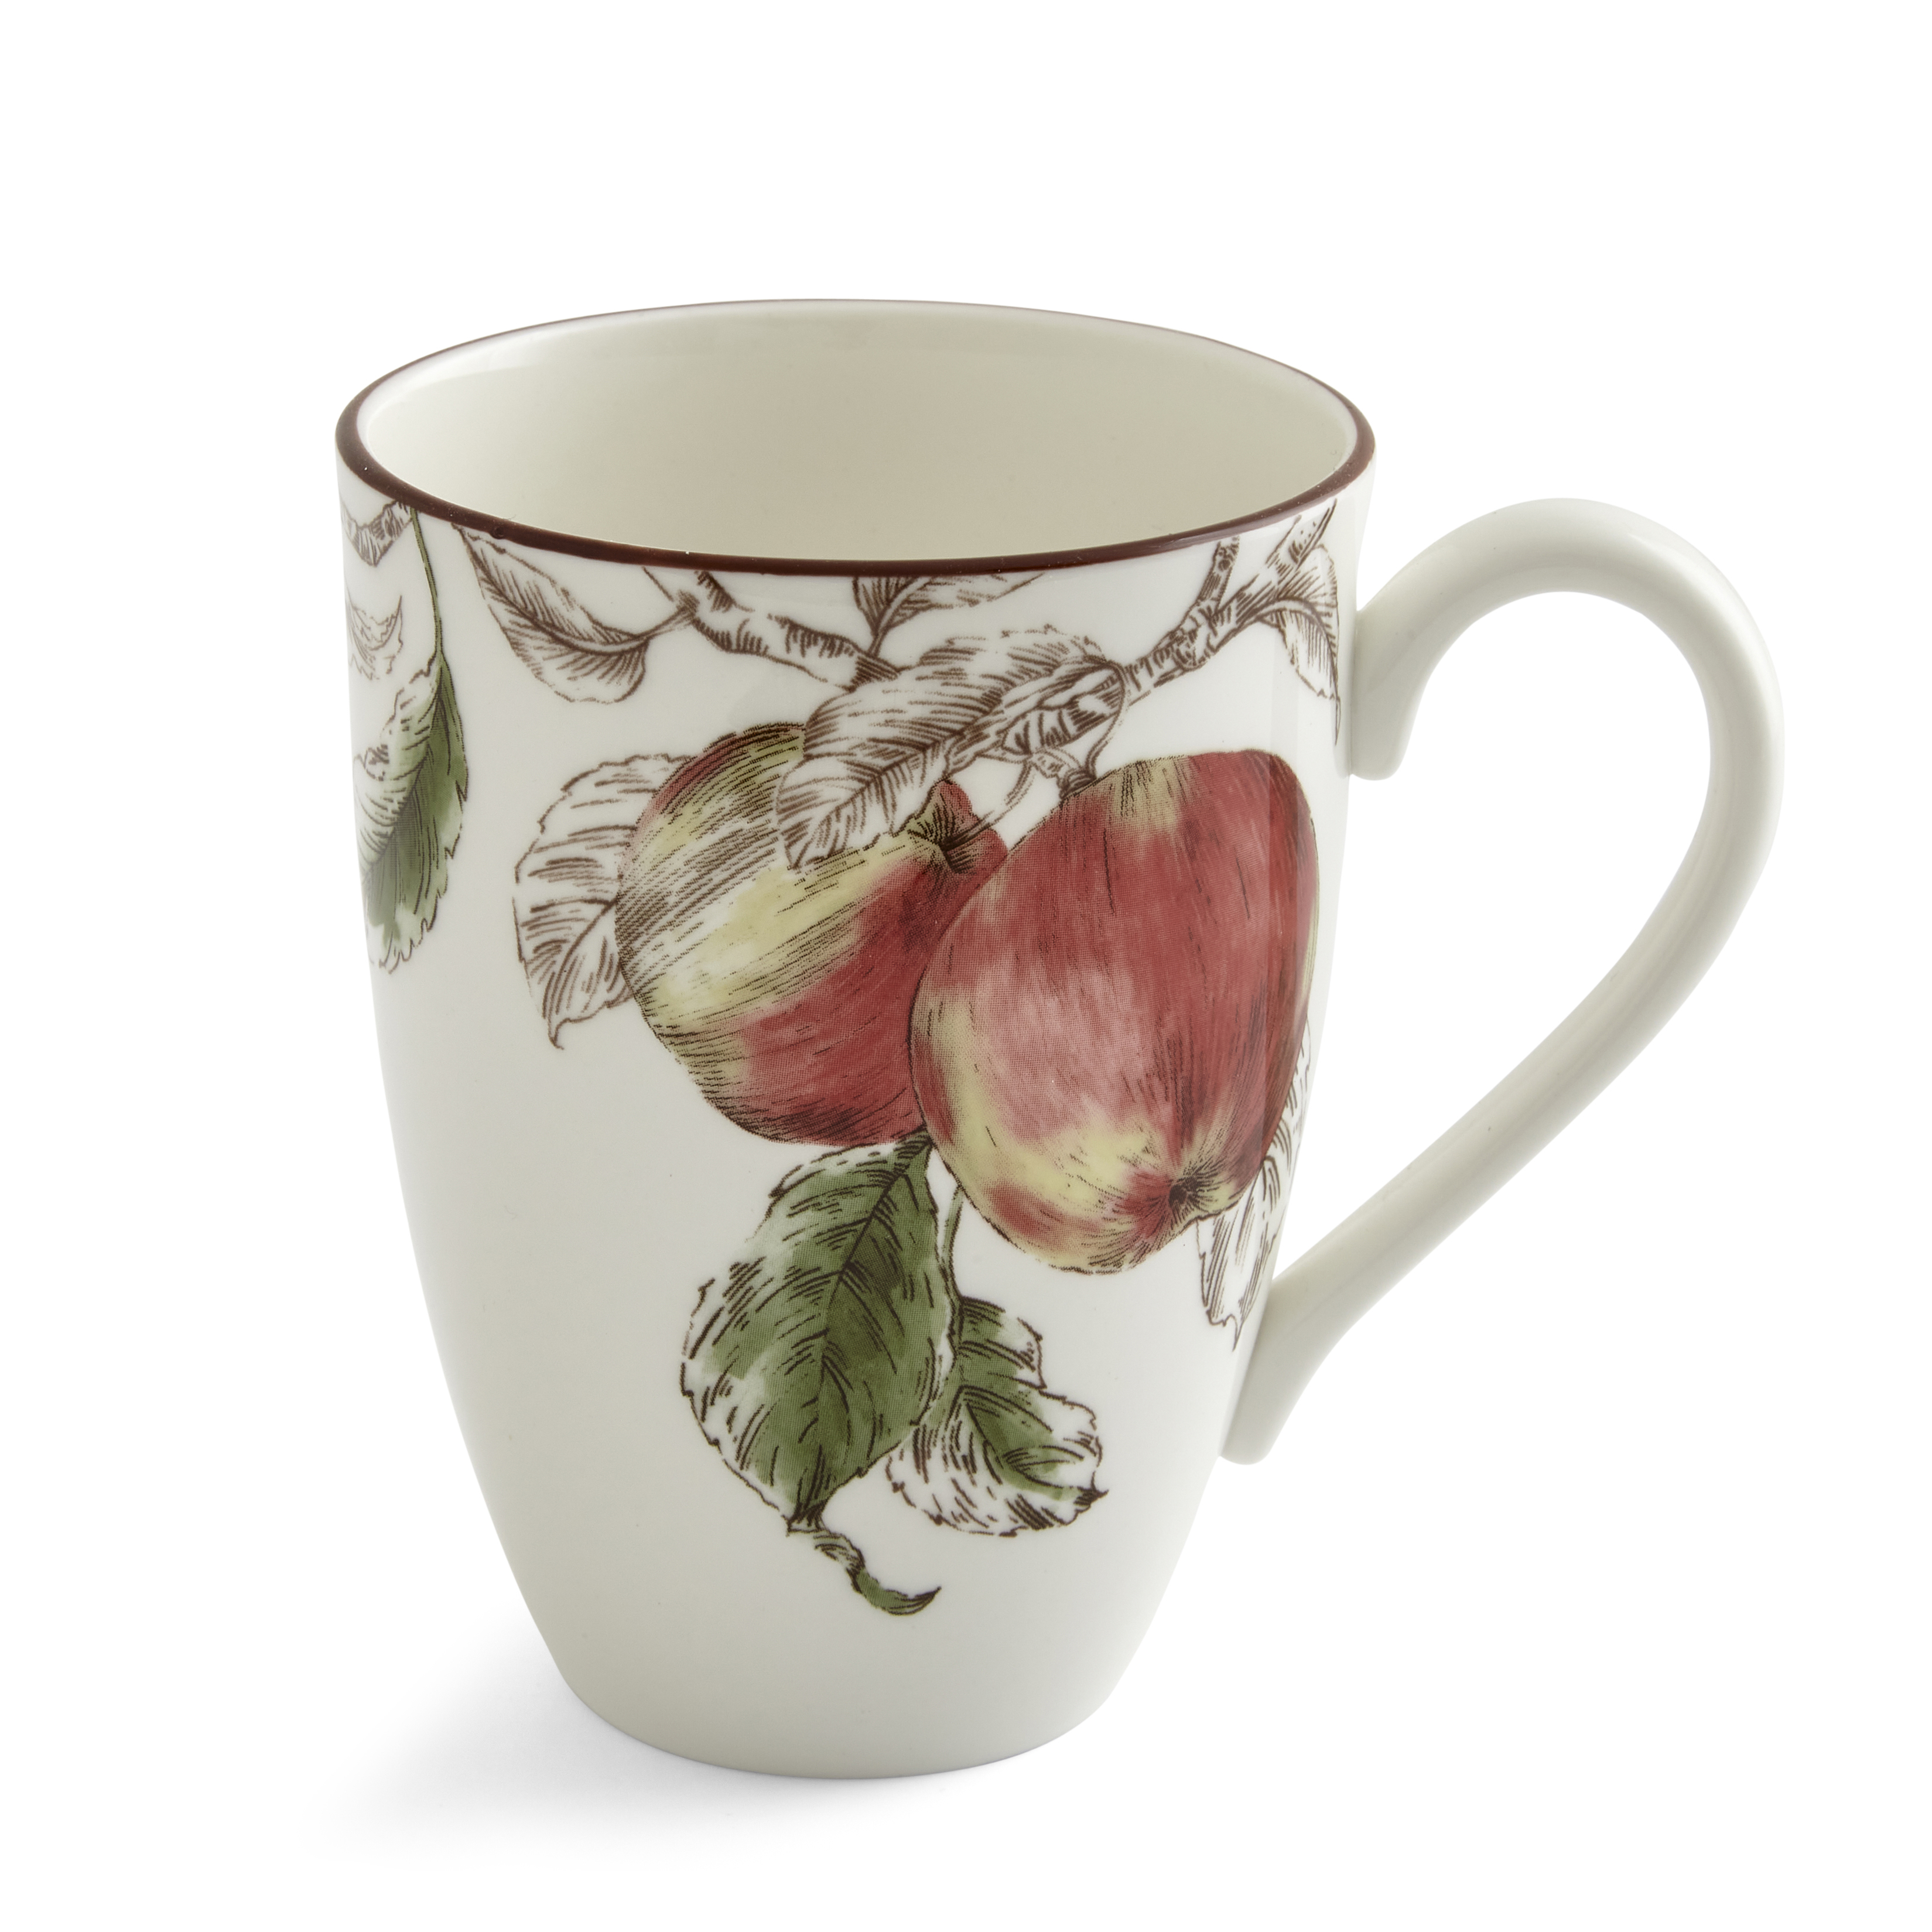 Nature's Bounty 17 Ounce Mug (Apple) image number null